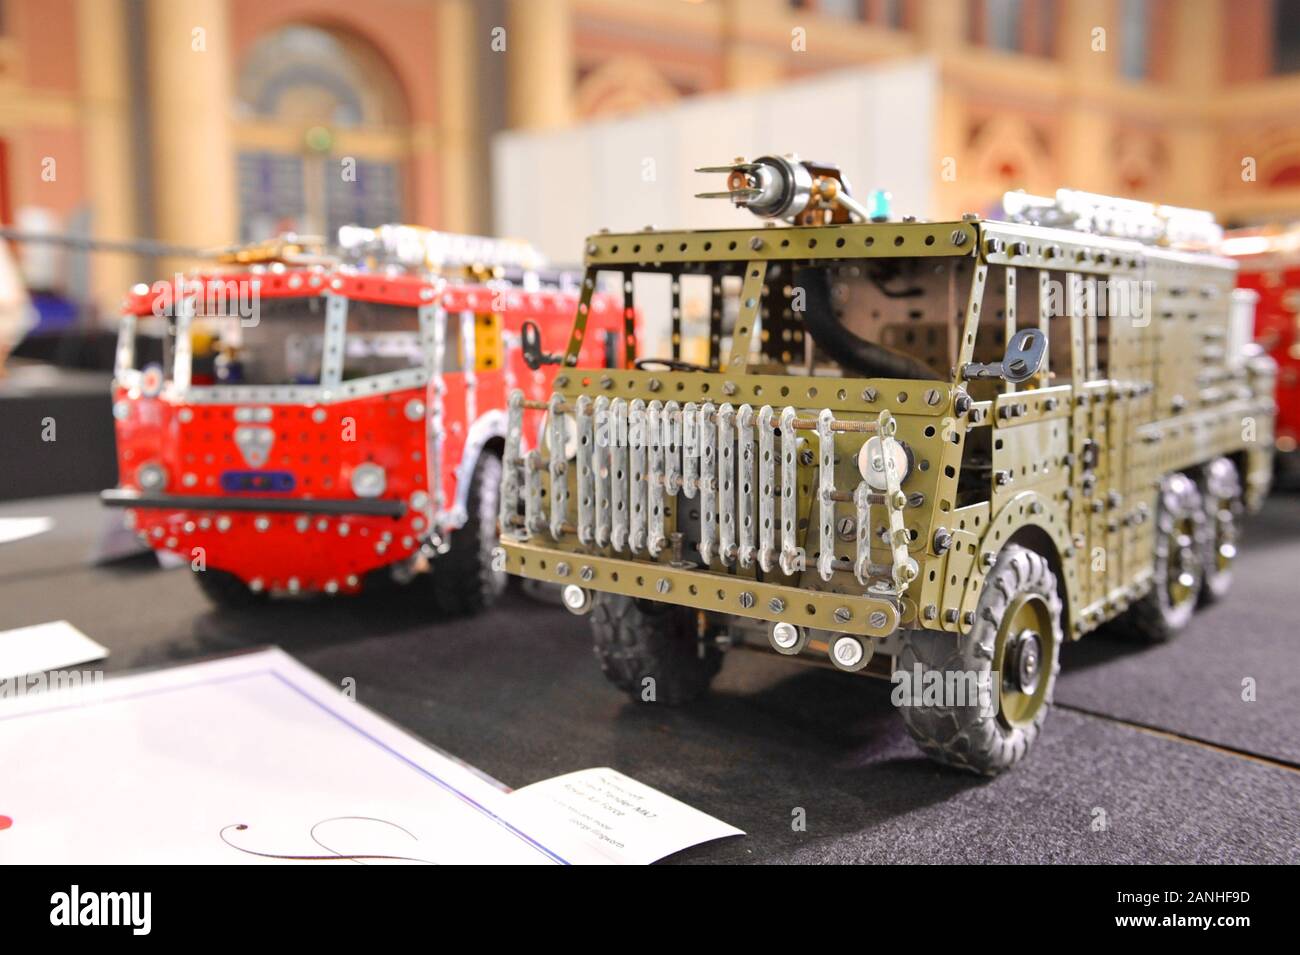 A Meccano model of a Royal Air Force Thornycroft Crash Tender Mk7 on display on the opening day of the London Model Engineering Exhibition opened today at Alexandra Palace, London.  The model is part of the collection of Warwick District Councillor and retired chartered Mechanical Engineer George Illingworth who is displaying 30 of his hand-built large 1/12 scale Meccano Fire Engines from his 60+ magnificent collection.  The show is one of the largest modelling exhibitions in the UK, blending the full spectrum of model creation from traditional model engineering, steam locomotives and traction Stock Photo